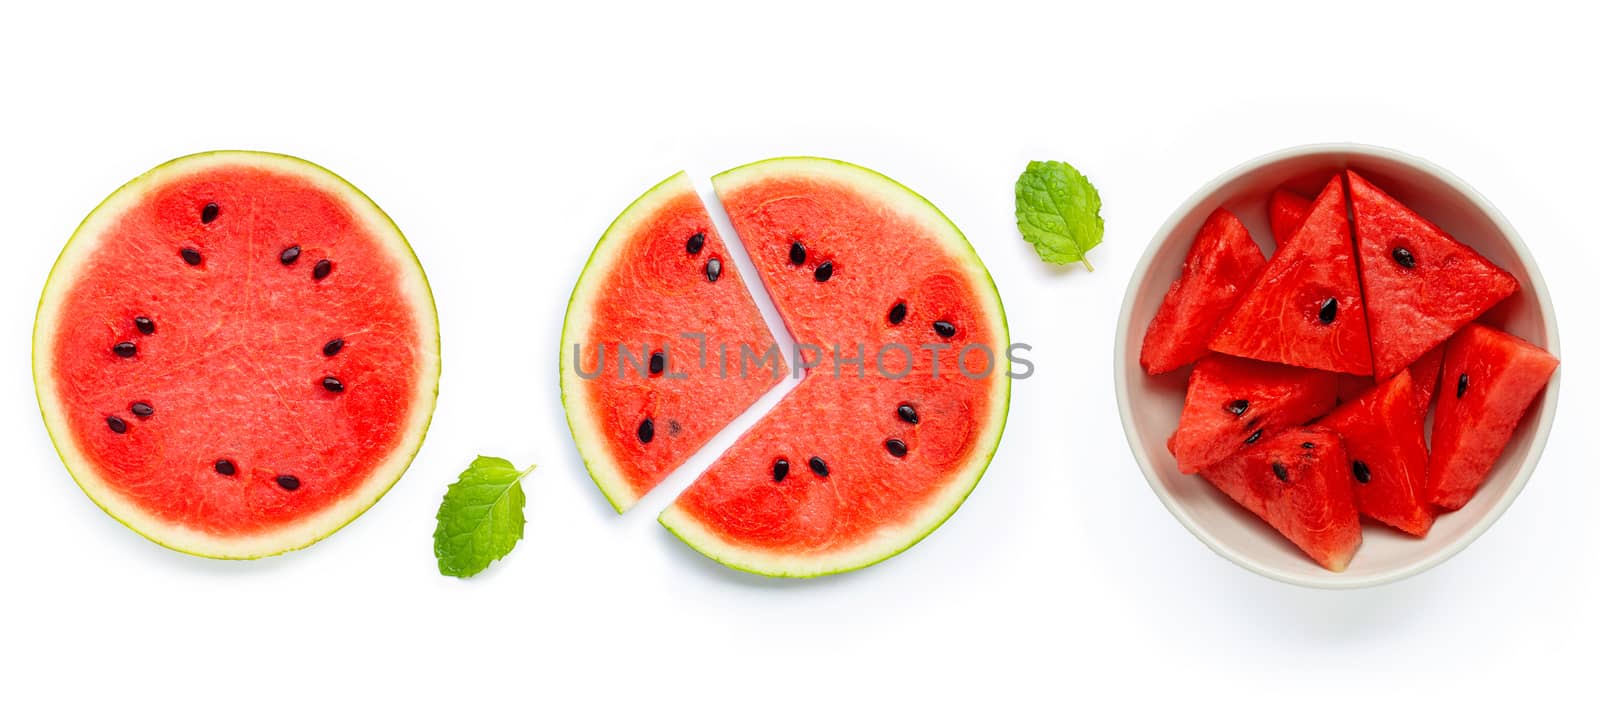 Slices of watermelon isolated on white background. by Bowonpat